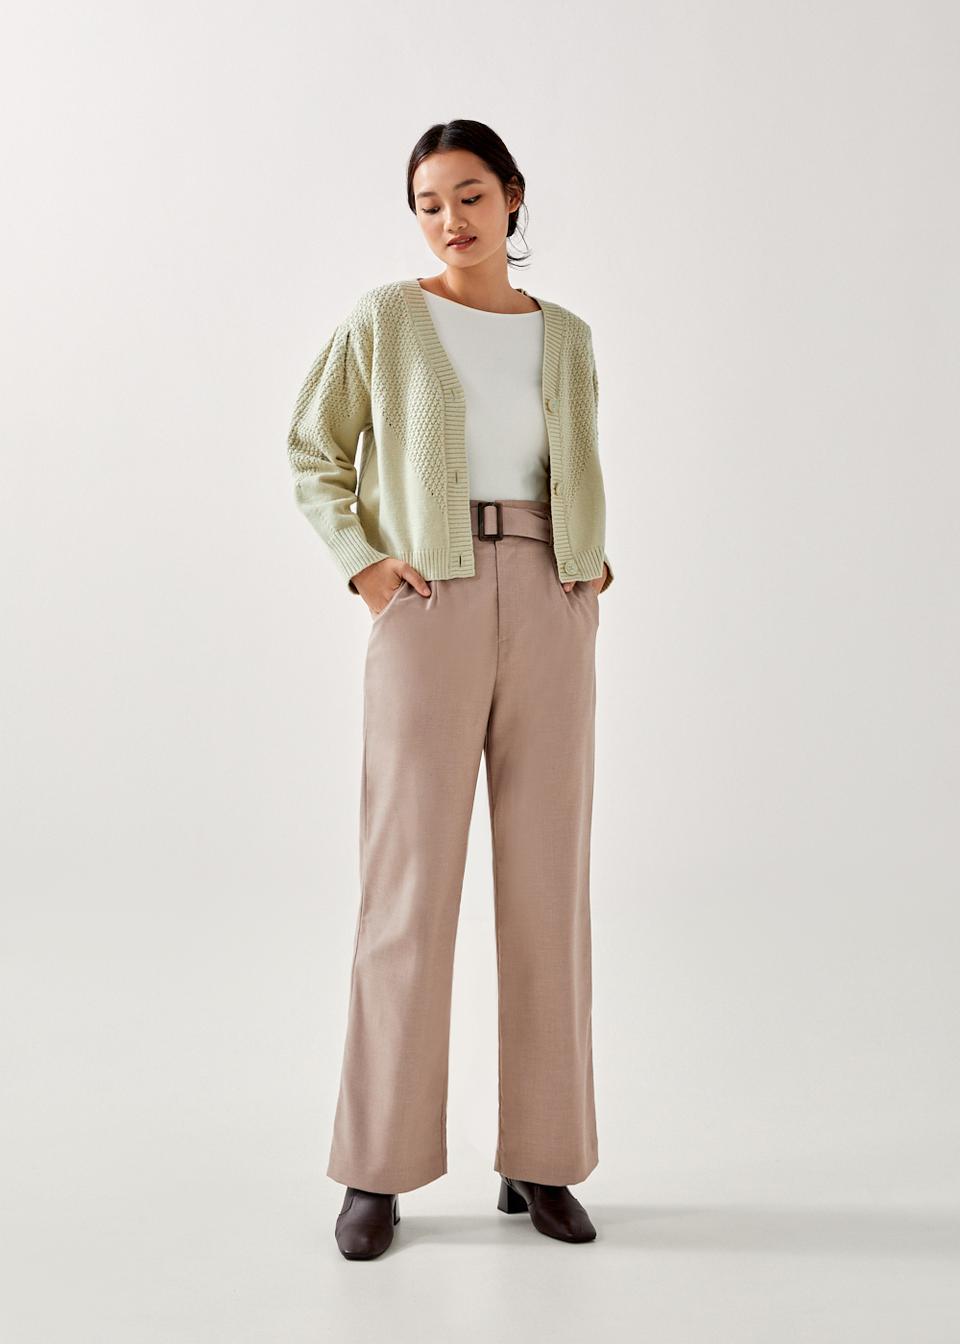 Kimmie Pointelle Cropped Cardigan